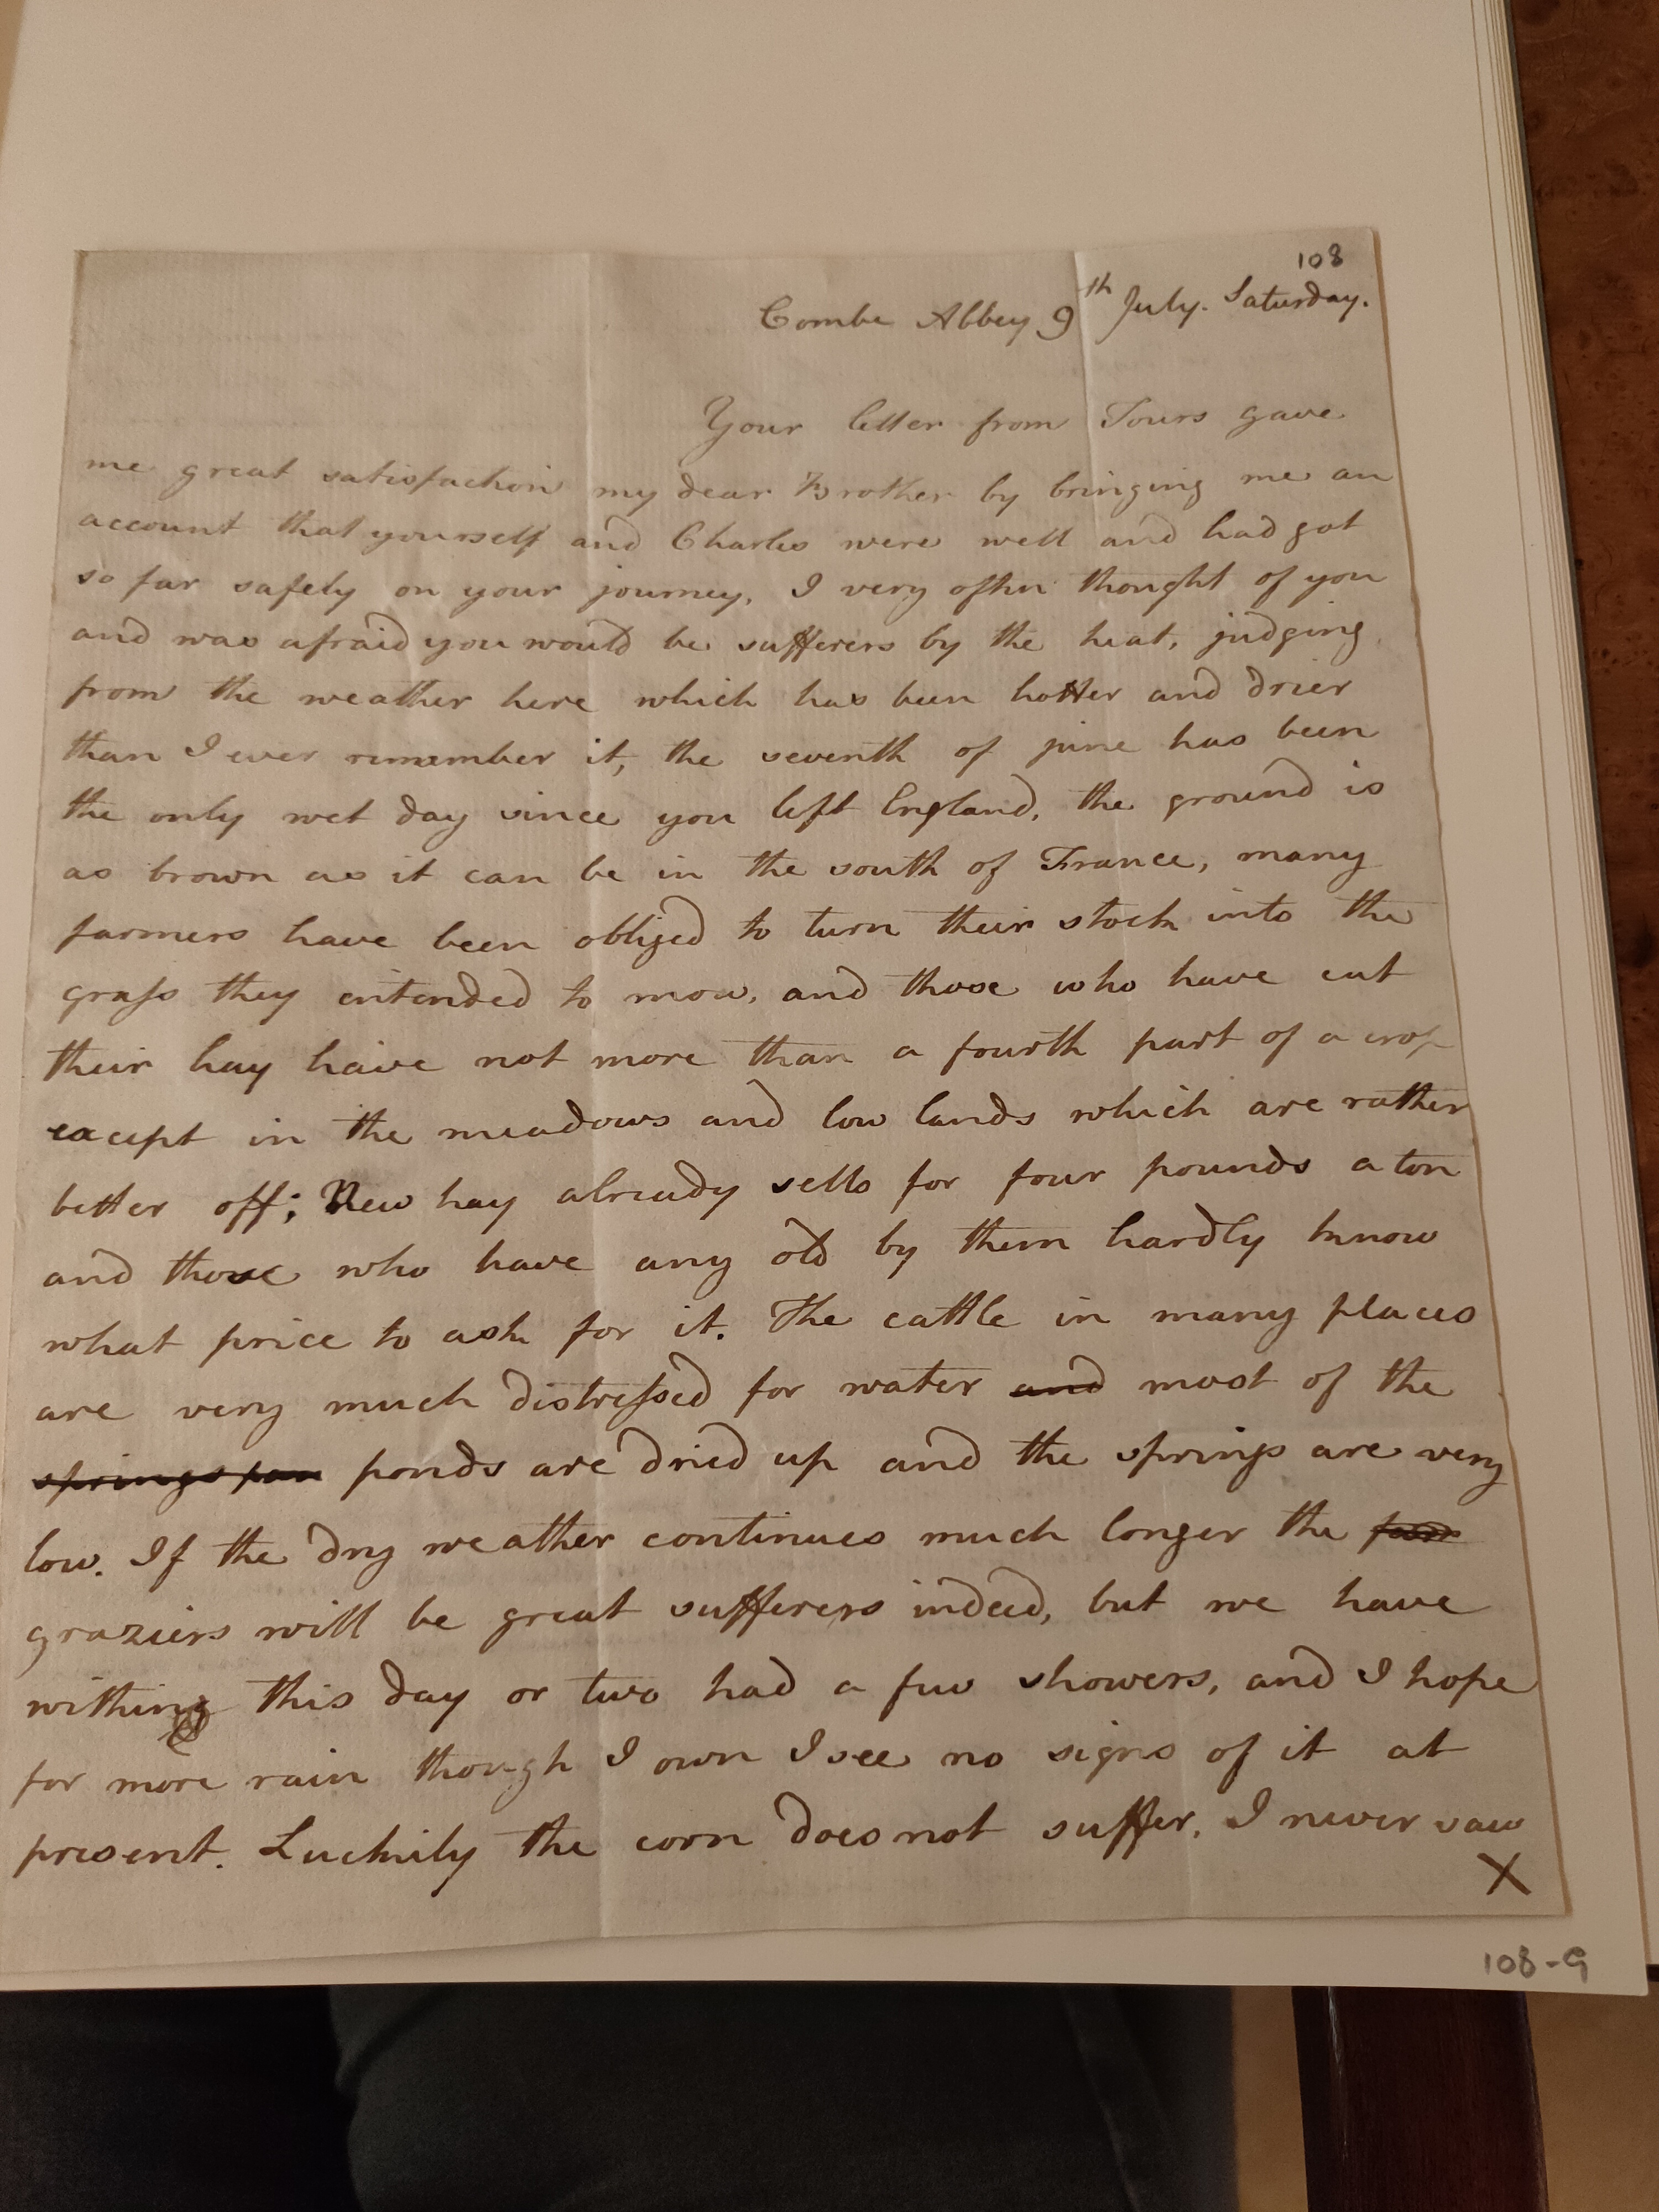 Image #1 of letter: Robert Augustus Johnson to George William Johnson, 9 July ?1783